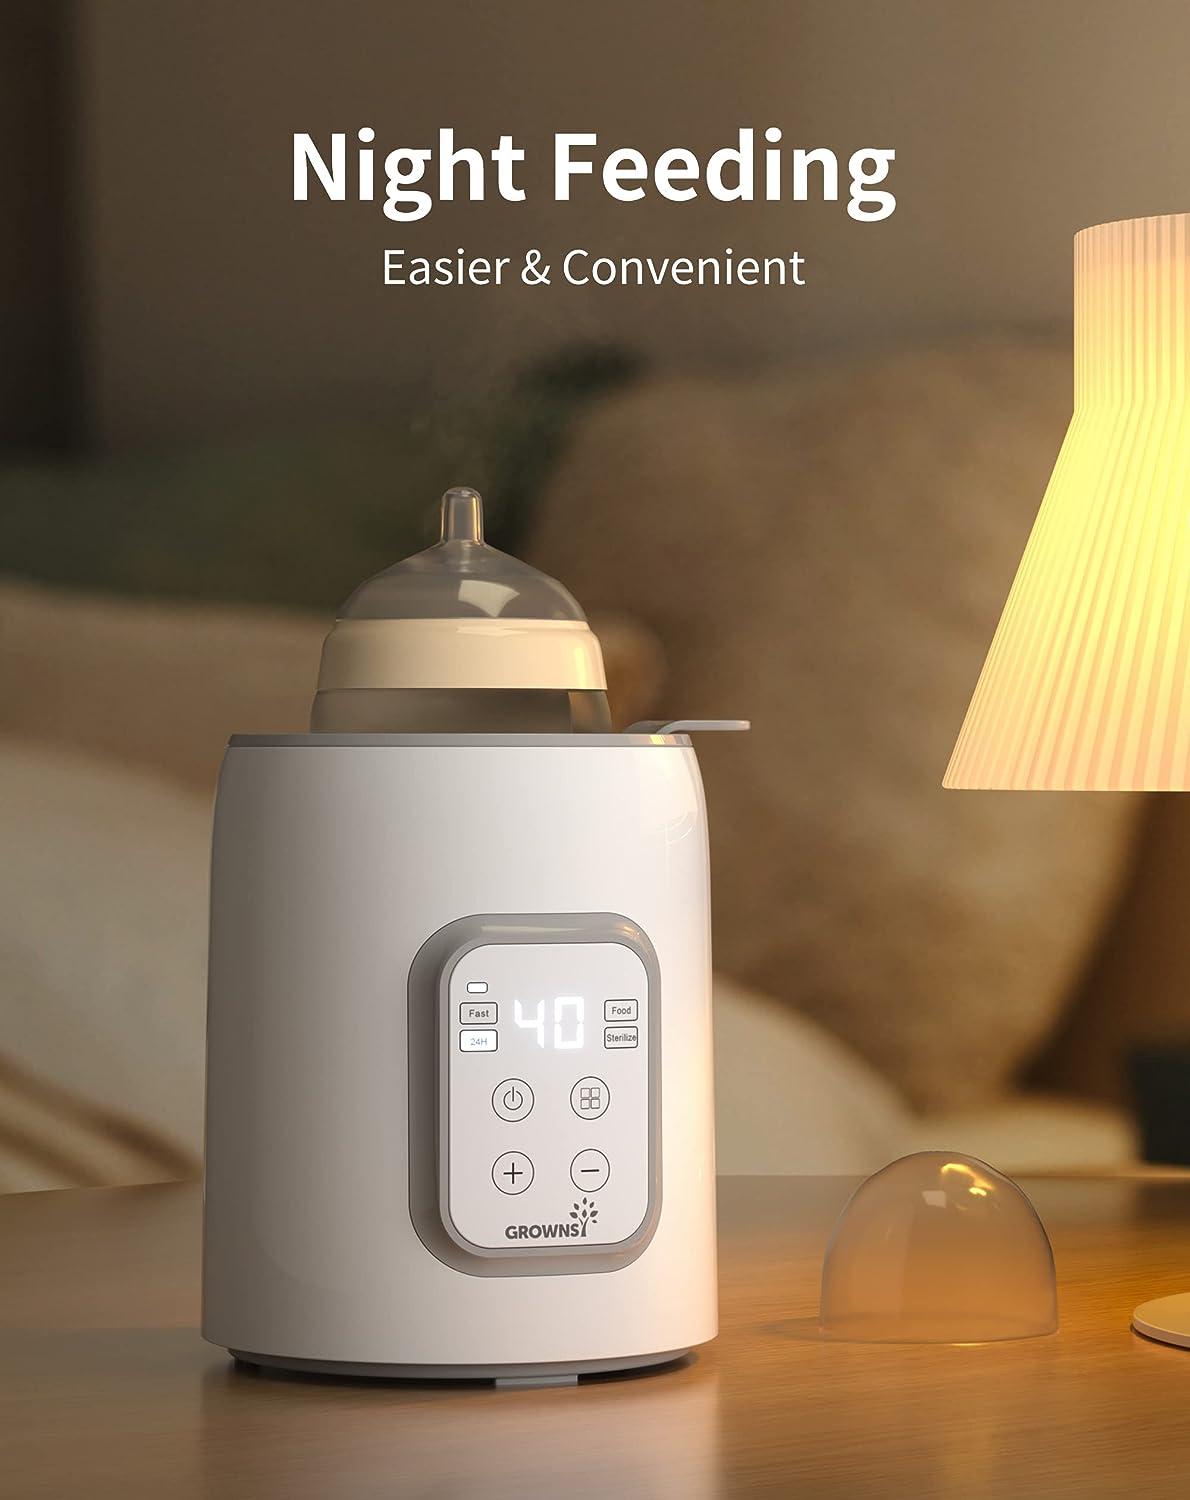 Instant Water Warmer, Baby Bottle Warmer, and Formula Maker with Night  Light, Instantly Hot Water Dispenser for All Bottle,3 Temperature Control  and